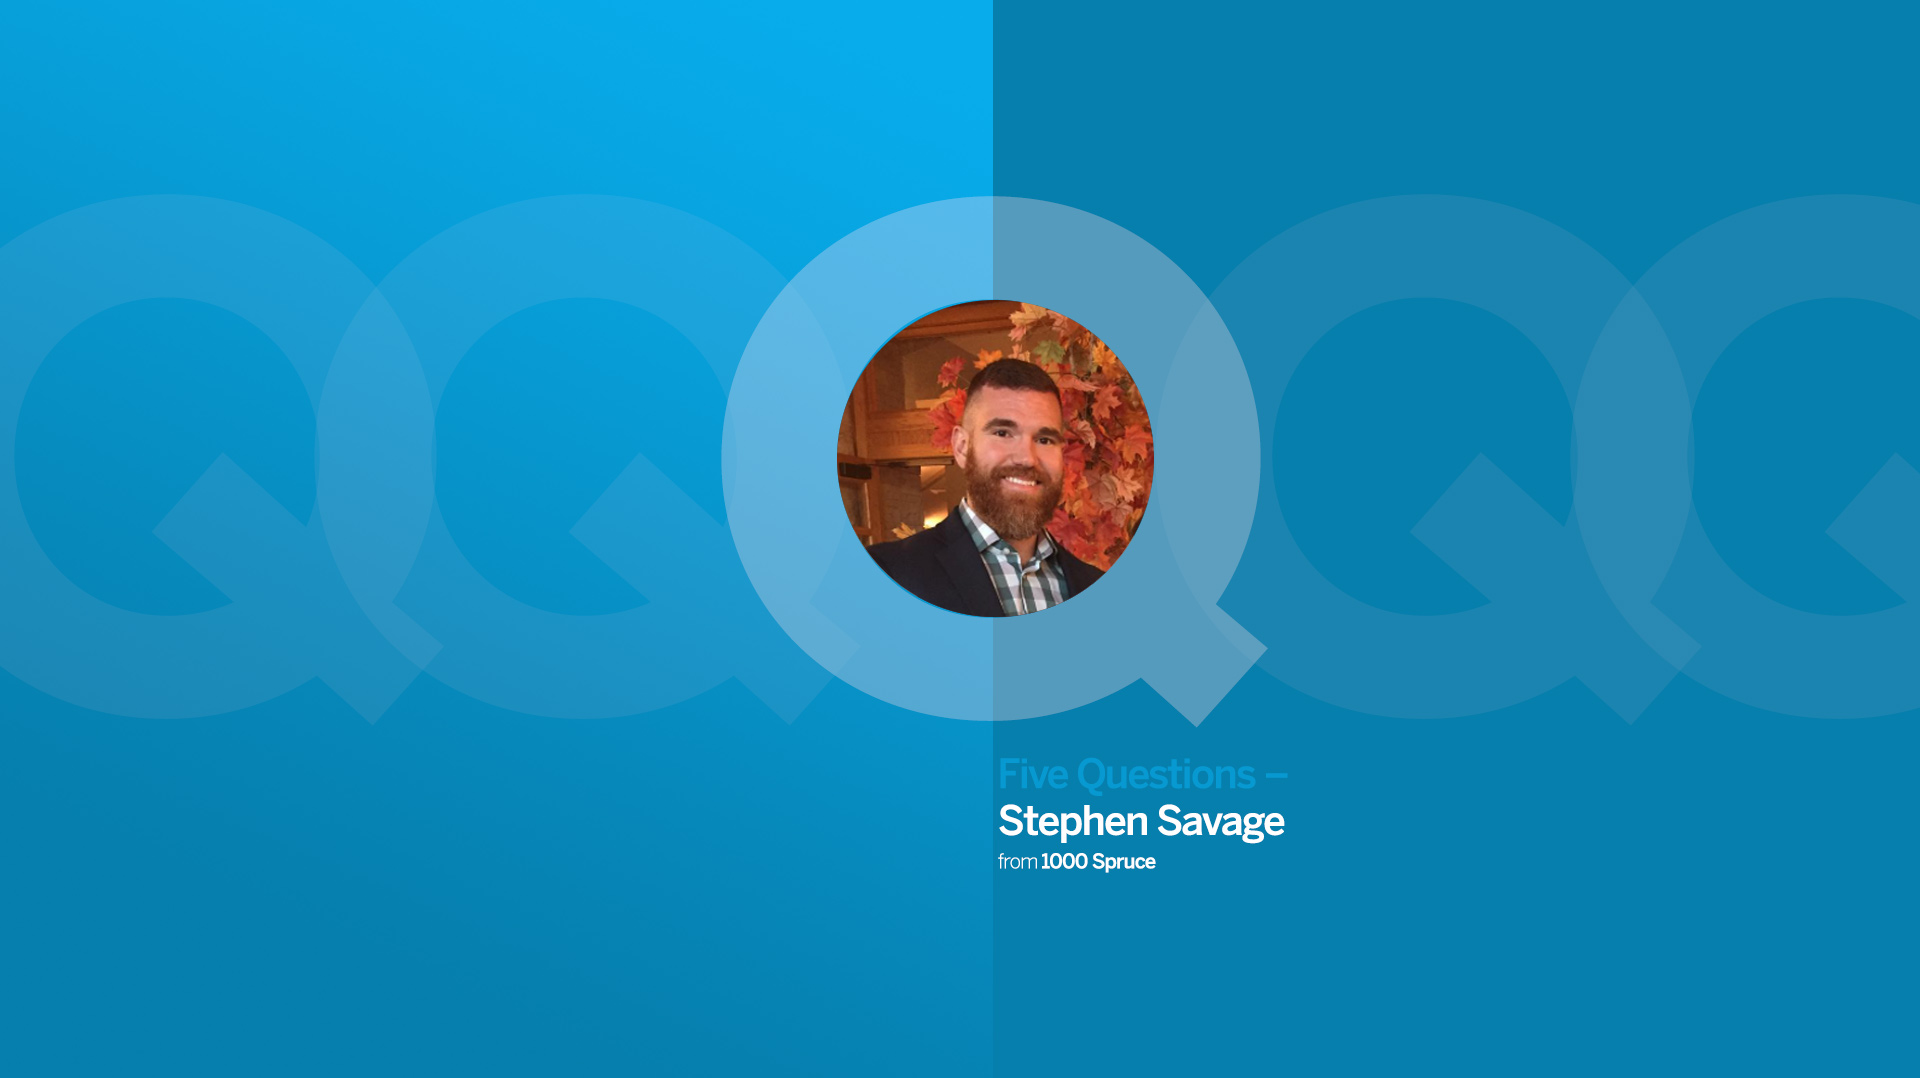 Five Questions with Stephen Savage